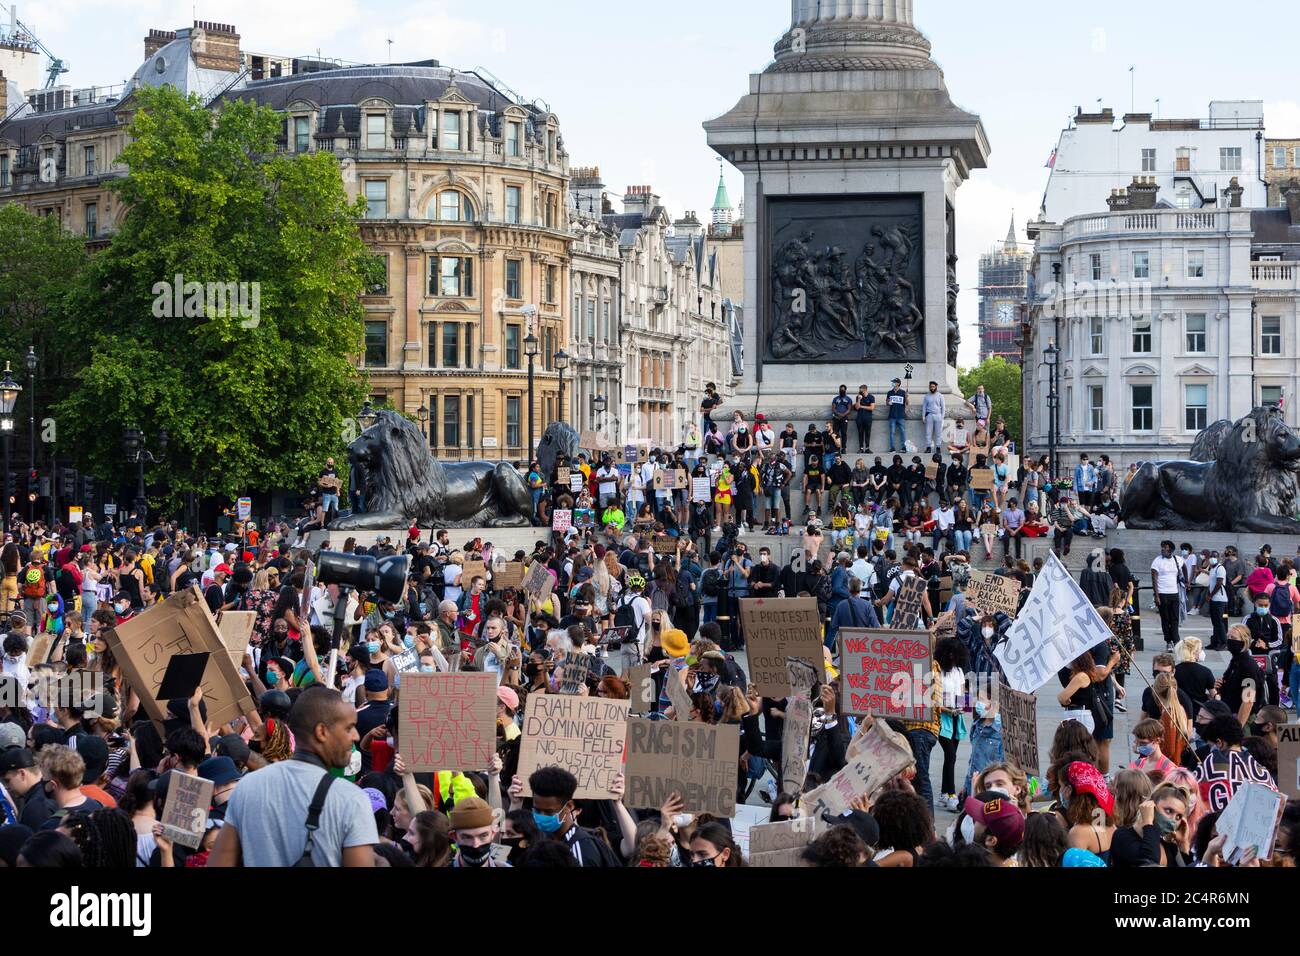 A large crowd of protesters during a Black Lives Matter demonstration, Trafalgar Square, London, 20 June 2020 Stock Photo